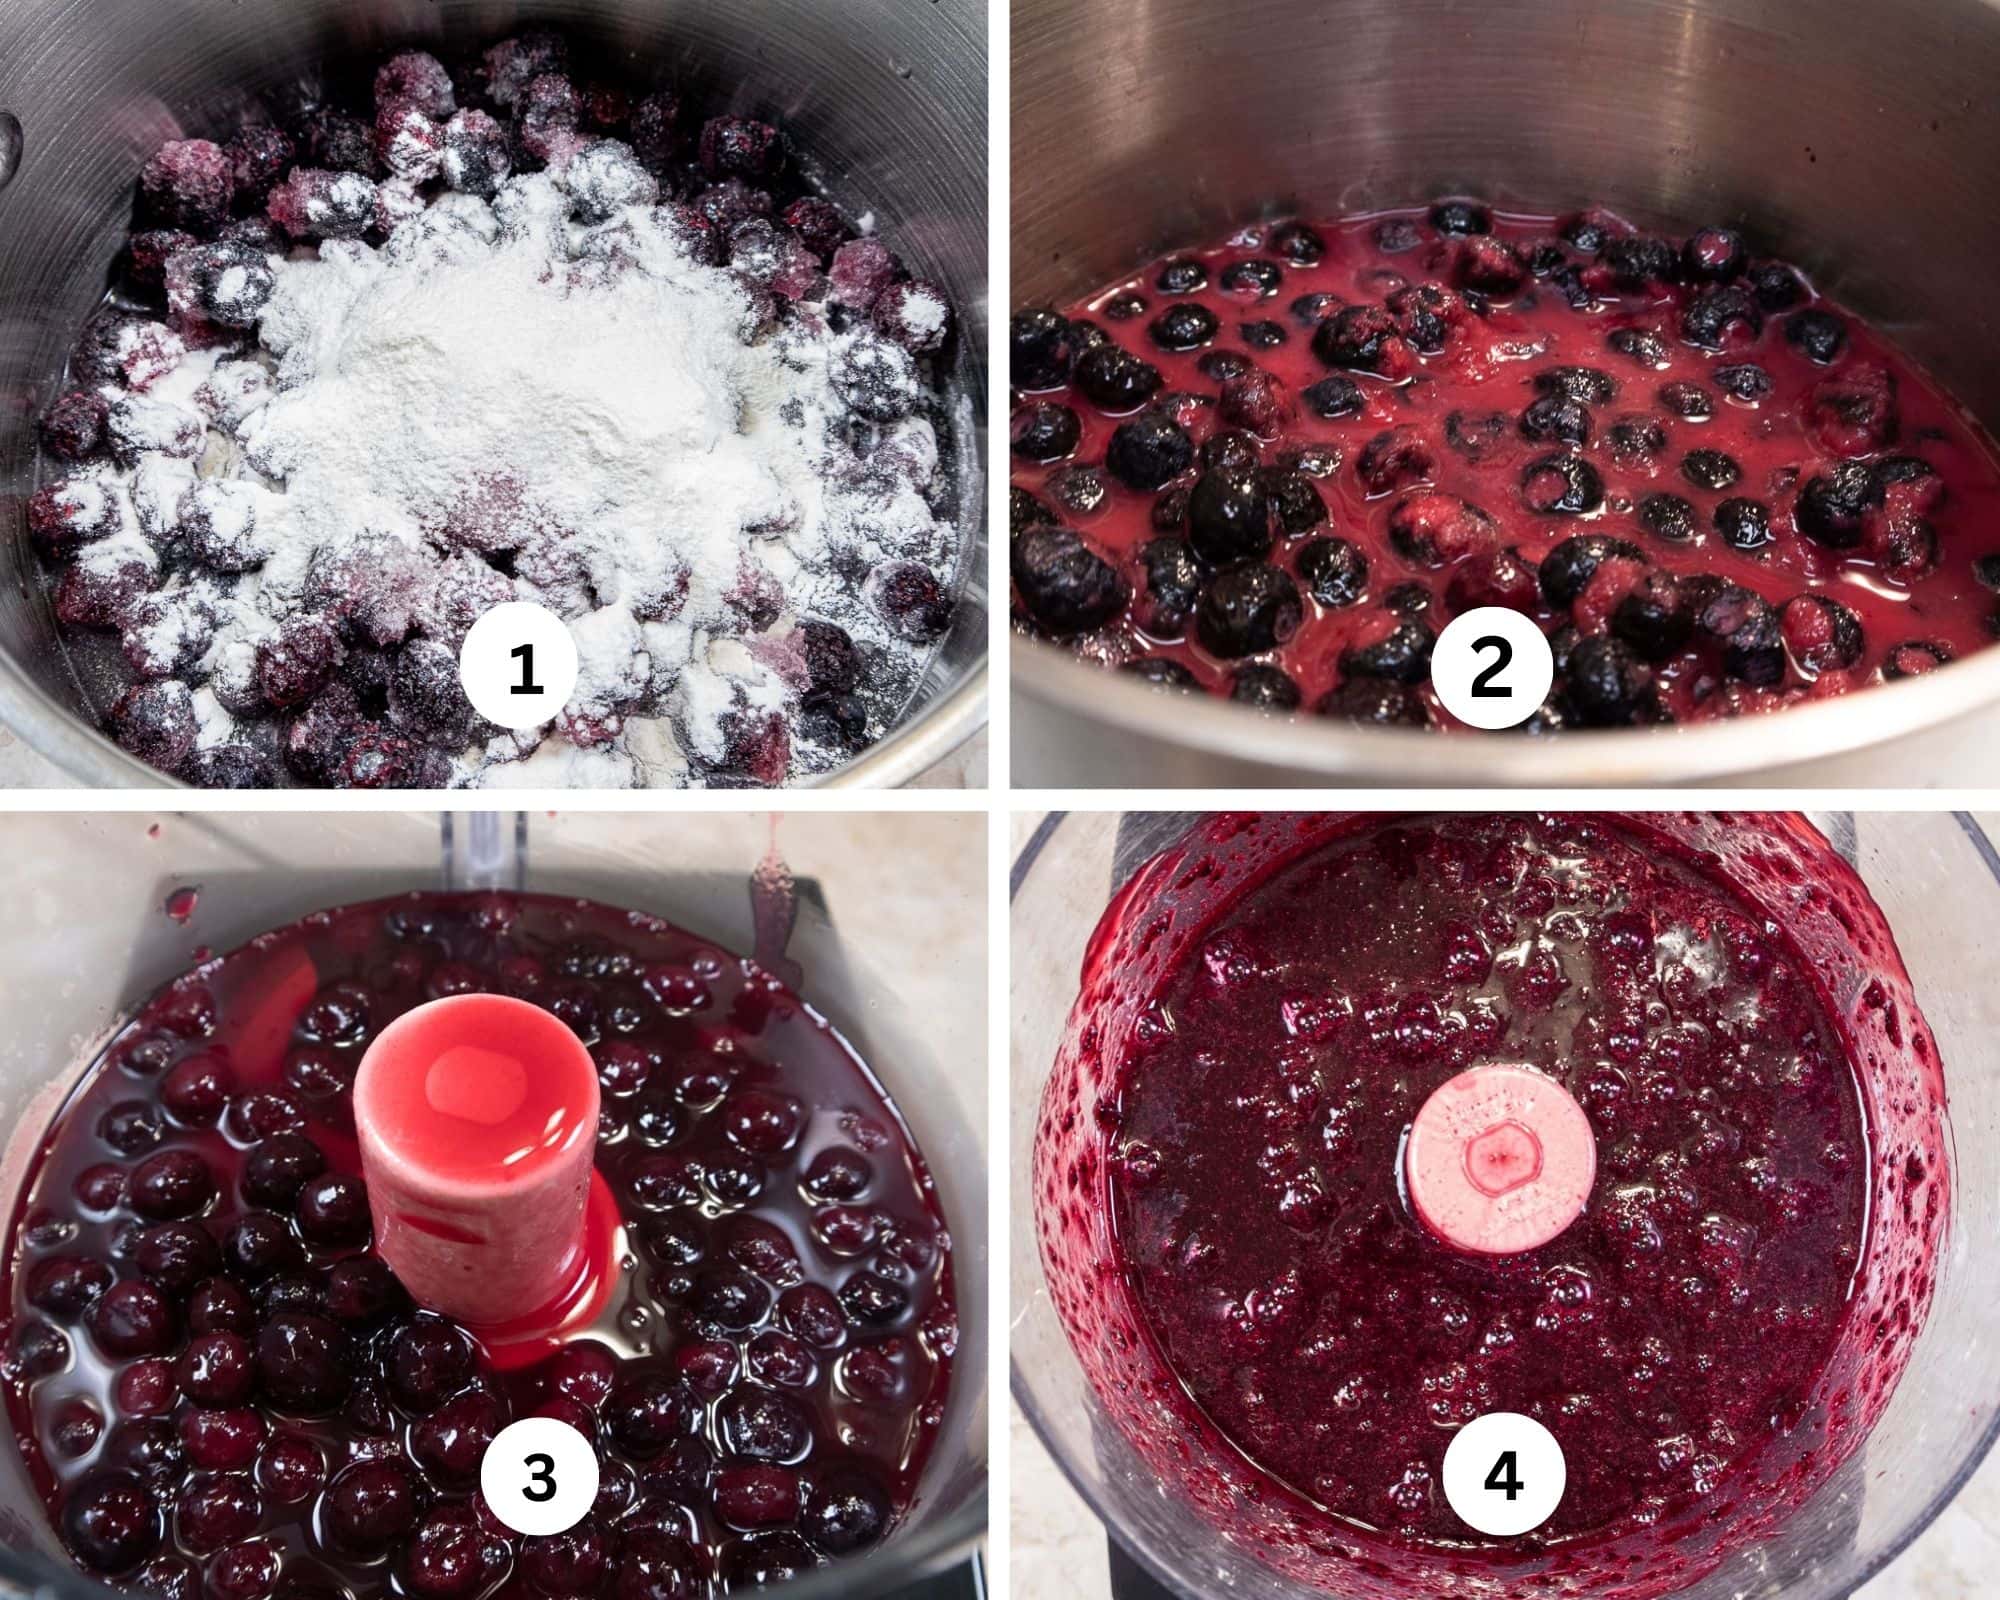 The blueberry puree collage shows the blueberries in a saucepan with the sugar and thickening on top, mixed in the pan, the cooked berries in the food processor and then processed.